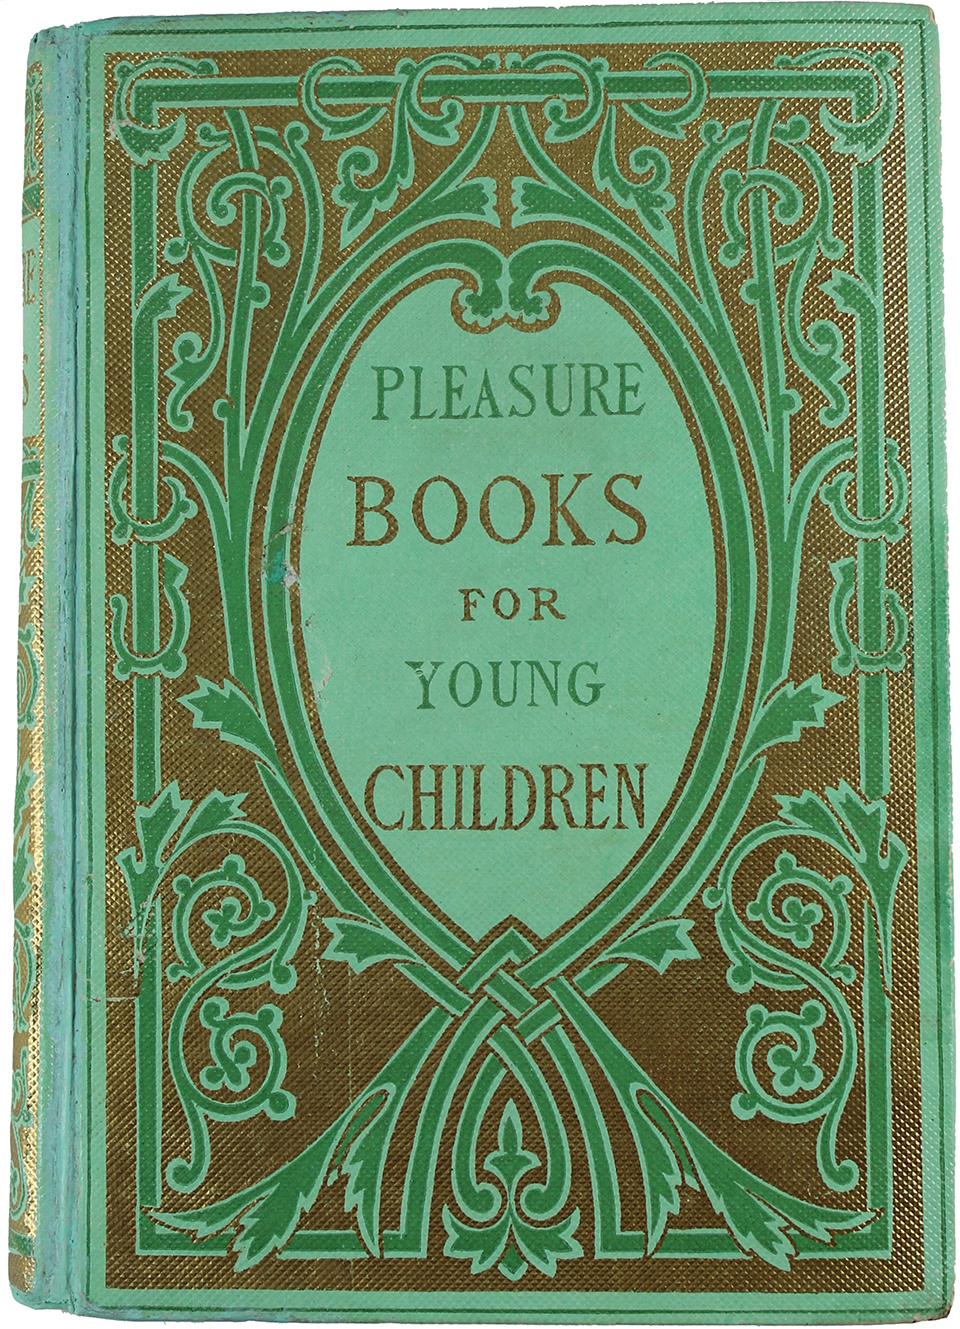 An 1850 edition of 